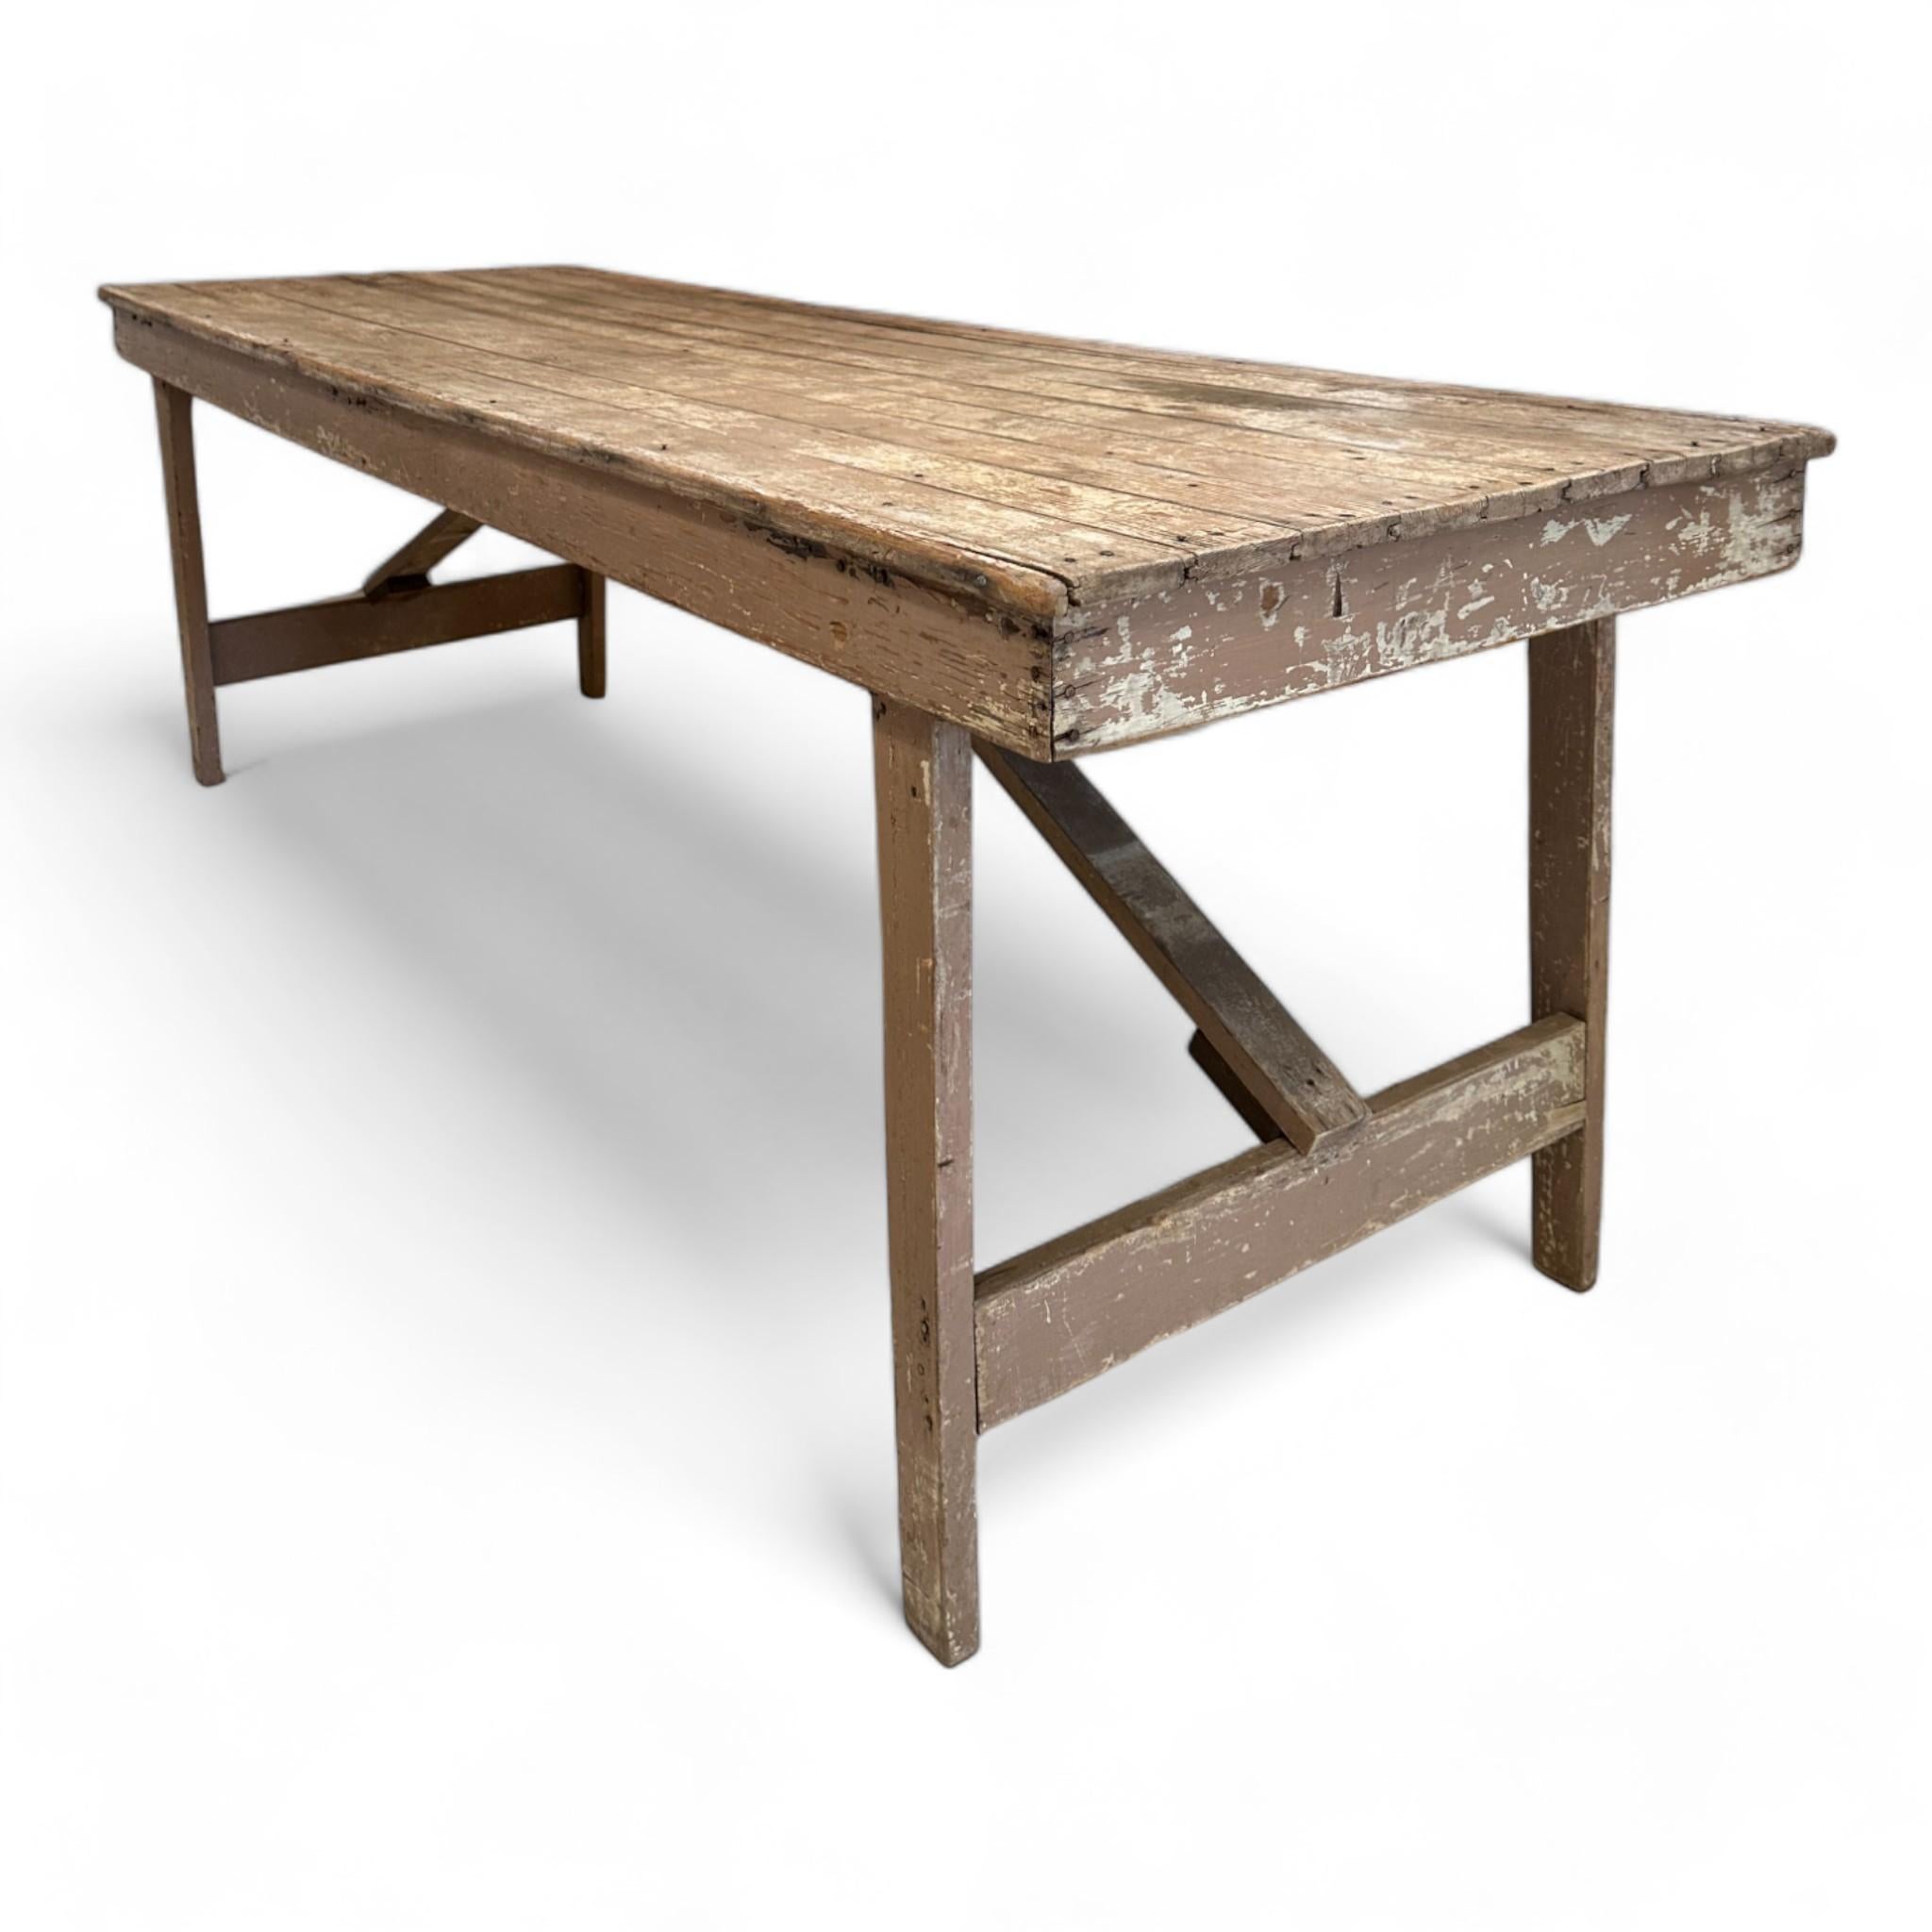 Our charming Vintage Farmhouse Table is a centerpiece for homes that celebrate furniture with a beloved story and adds an abundance of warmth and character to your space. 

Perfect for hosting family gatherings or intimate dinners, its spacious